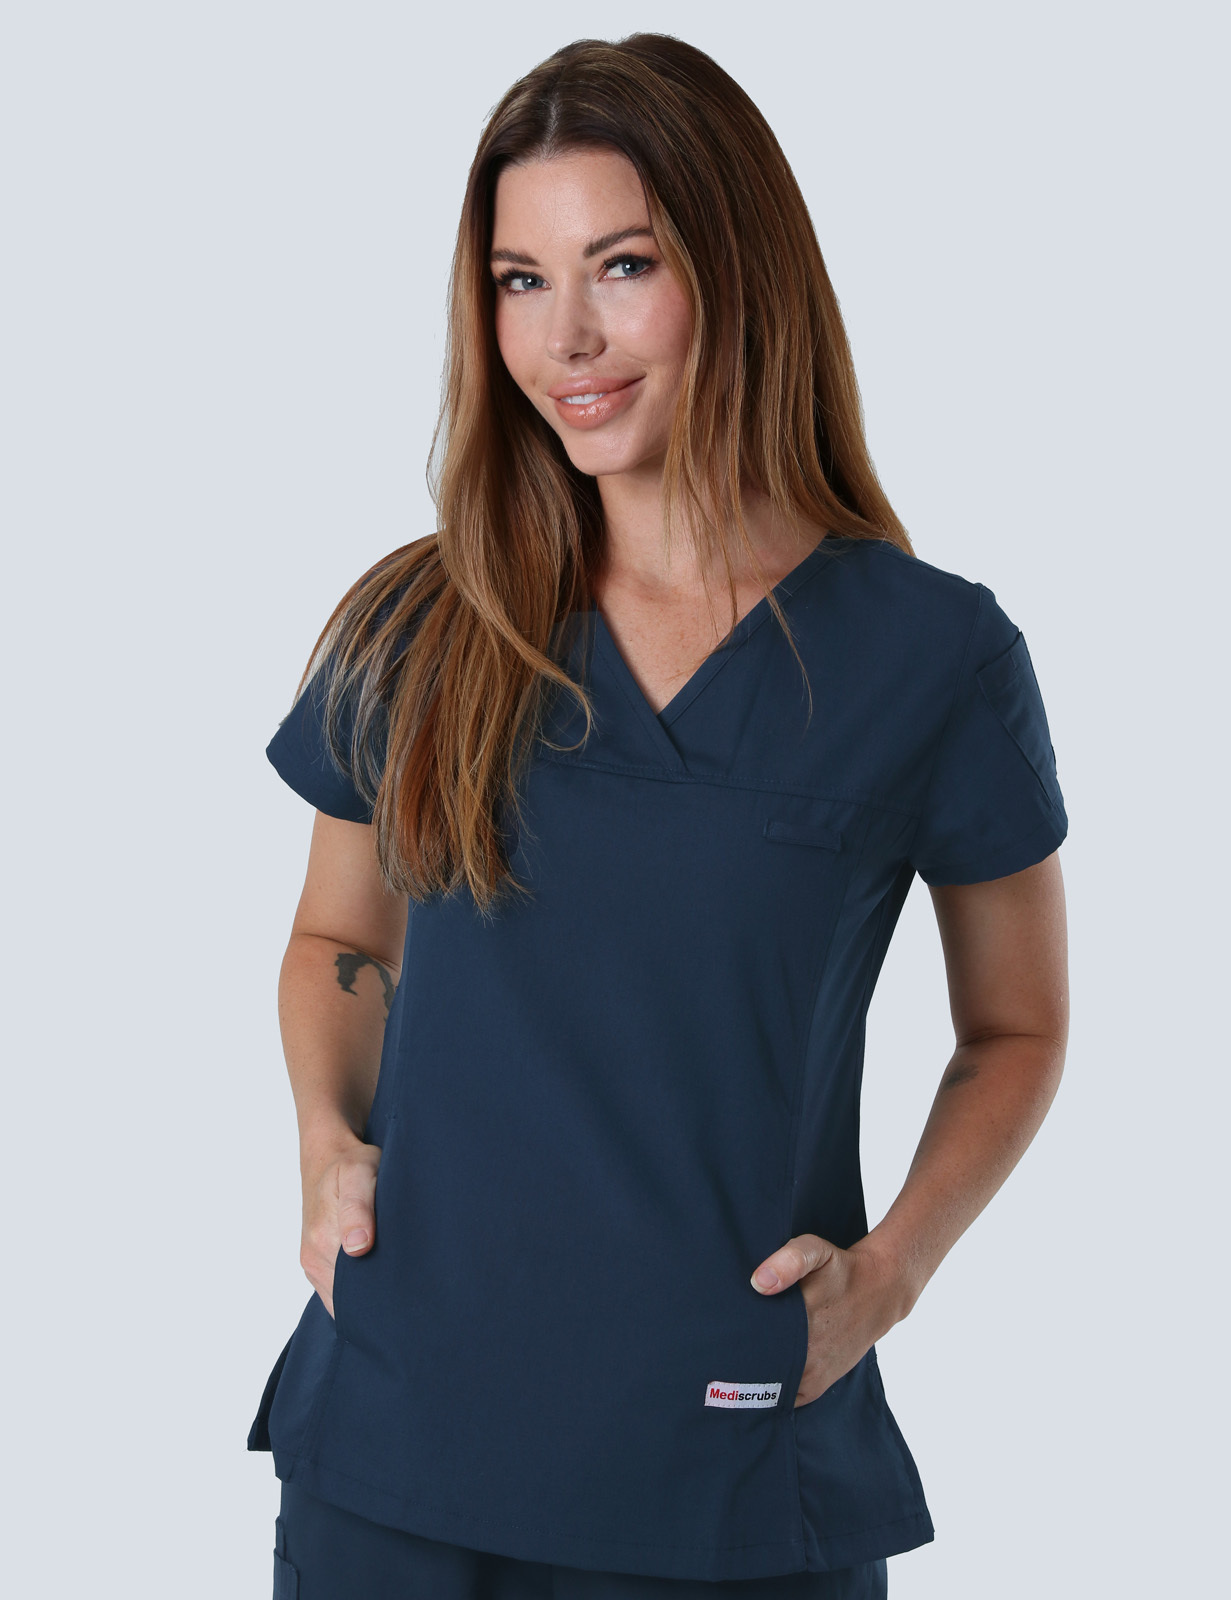 Logan Hospital - ICU RN (Women's Fit Solid Scrub Top and Cargo Pants in Navy incl Logos)